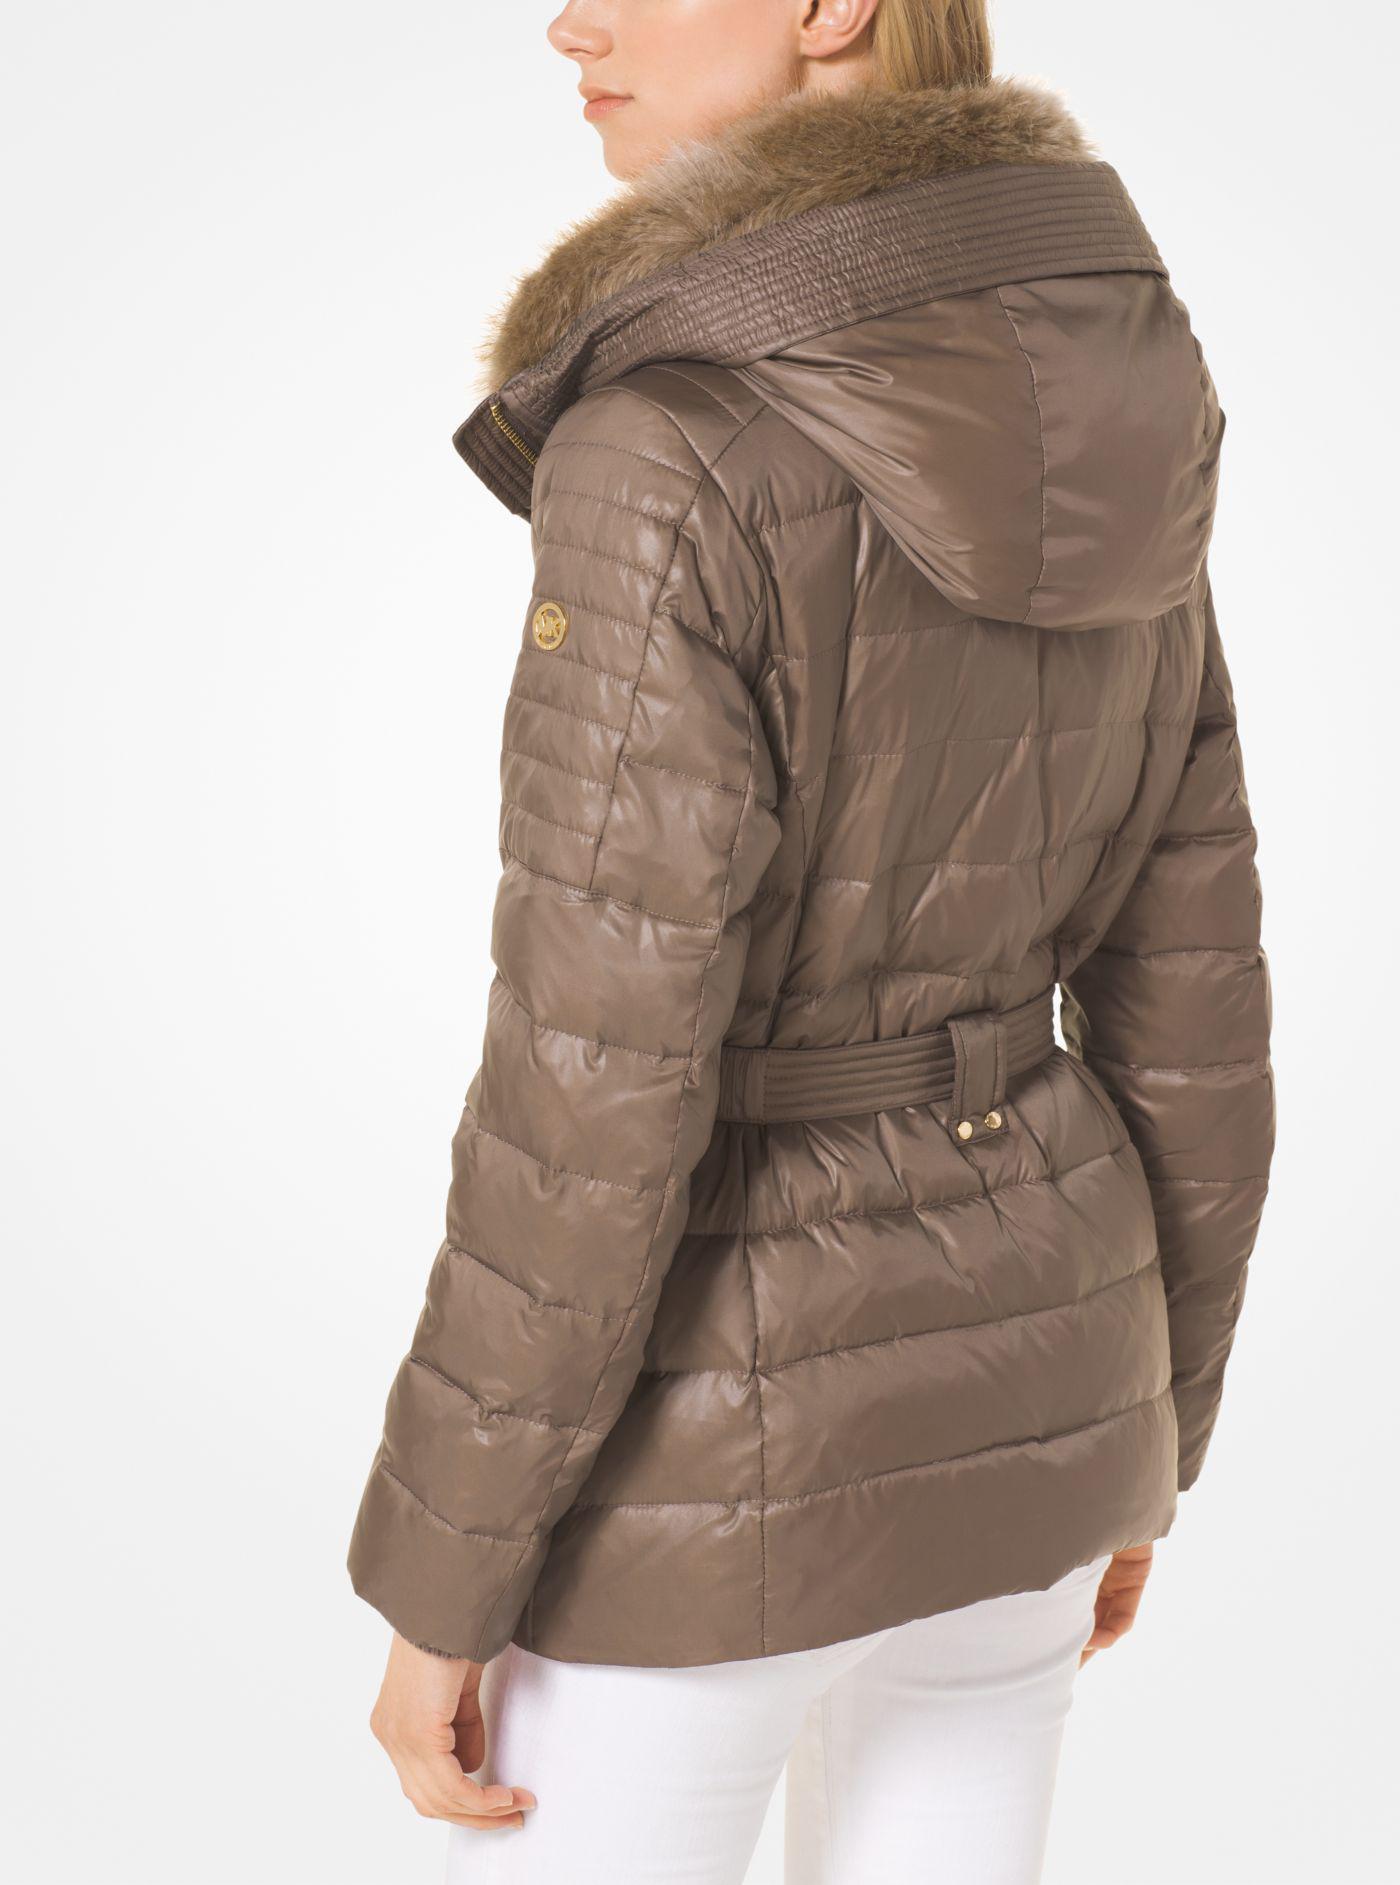 Michael Kors Quilted Down And Faux Fur Puffer Jacket in Taupe 